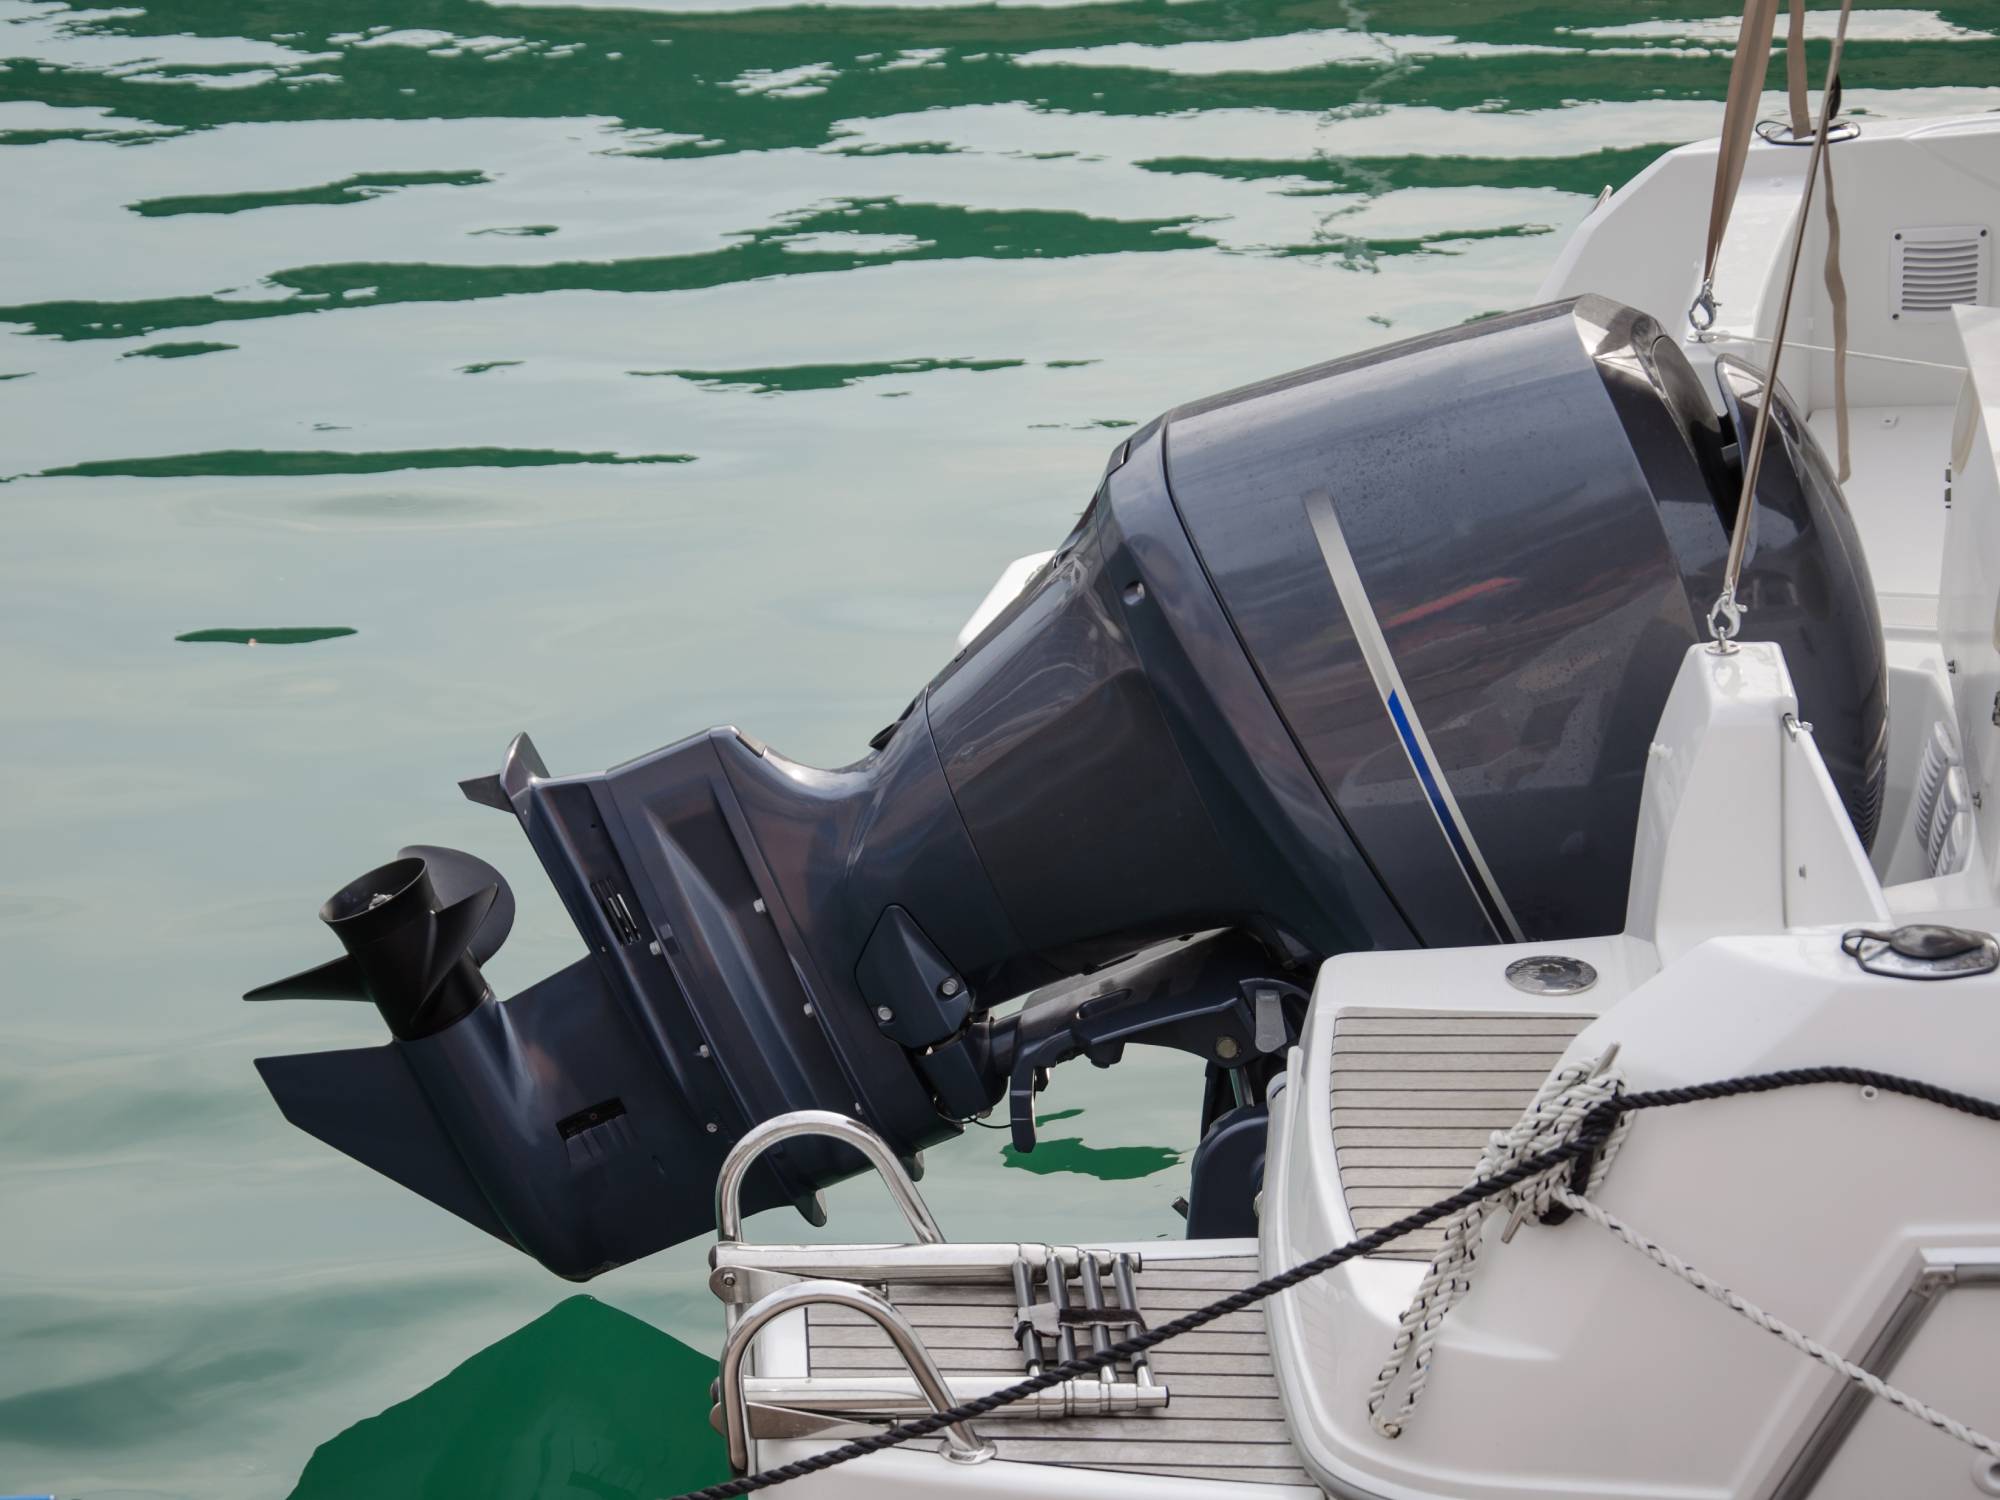 The Best Ideas for Storing an Outboard Motor